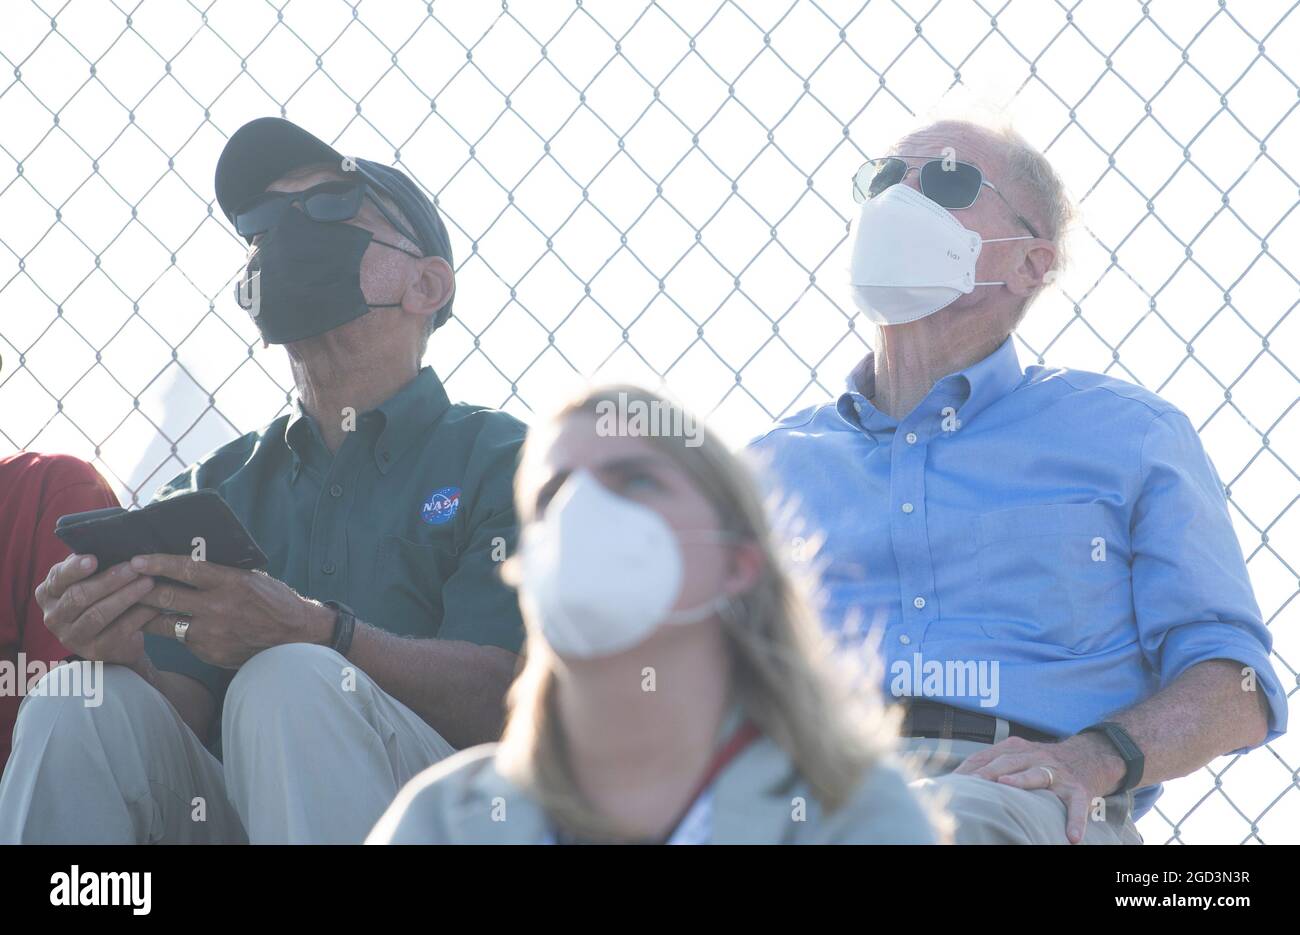 Atlantic Regional Spaceport, US,  Aug. 10, 2021, NASA Administrator Bill Nelson, right, and former NASA Administrator Charles Bolden, left, watch as a Northrop Grumman Antares rocket carrying a Cygnus resupply spacecraft launches from Pad-0A of the Mid-Atlantic Regional Spaceport, Tuesday, Aug. 10, 2021, at NASA's Wallops Flight Facility in Virginia. Northrop Grummans 16th contracted cargo resupply mission with NASA will deliver nearly 8,200 pounds of science and research, crew supplies and vehicle hardware to the International Space Station and its crew. Mandatory Credit: Joel Kowsky/NASA vi Stock Photo